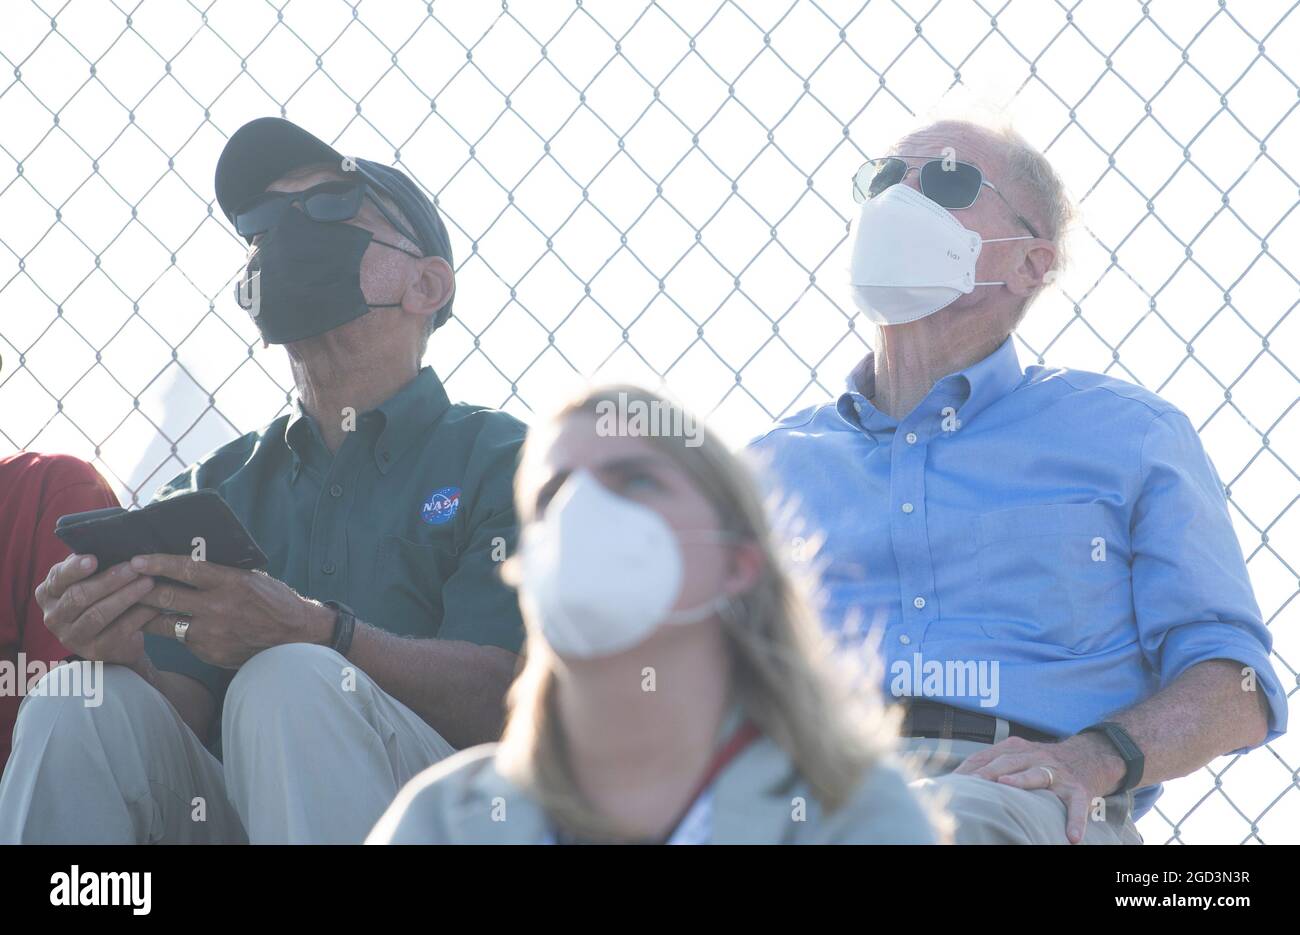 Atlantic Regional Spaceport, US,  Aug. 10, 2021, NASA Administrator Bill Nelson, right, and former NASA Administrator Charles Bolden, left, watch as a Northrop Grumman Antares rocket carrying a Cygnus resupply spacecraft launches from Pad-0A of the Mid-Atlantic Regional Spaceport, Tuesday, Aug. 10, 2021, at NASA's Wallops Flight Facility in Virginia. Northrop Grummans 16th contracted cargo resupply mission with NASA will deliver nearly 8,200 pounds of science and research, crew supplies and vehicle hardware to the International Space Station and its crew. Mandatory Credit: Joel Kowsky/NASA vi Stock Photo